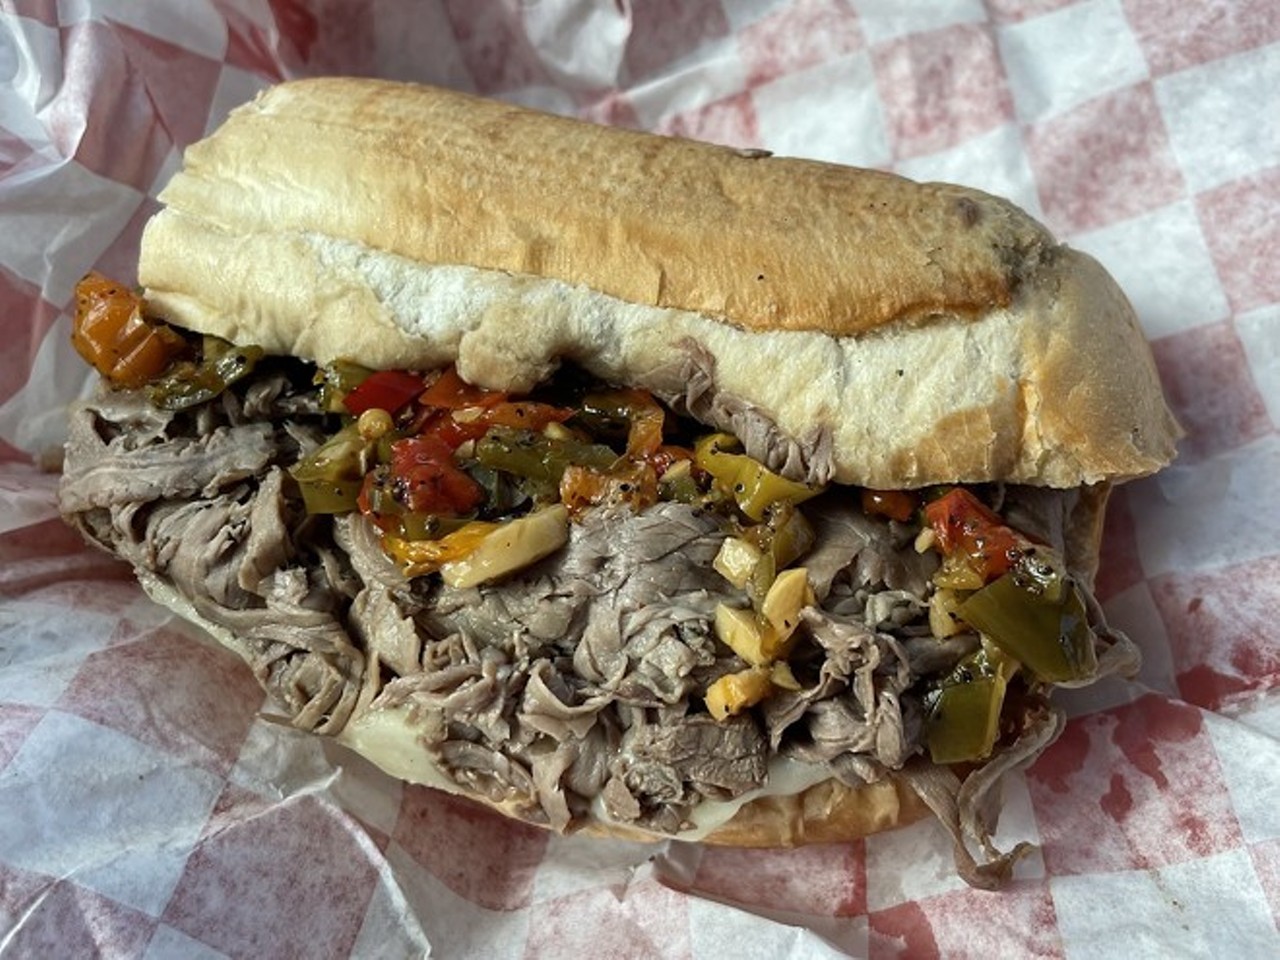 Italian Beef at Au Jus
Au Jus, 5875 Broadview Rd., Parma, 216-795-5063, aujus-cle.com 
It’s not every day that legends are born. With the opening of Au Jus in Parma, Cleveland’s Italian beef game immediately climbed to championship level. Wedged between a Marco’s Pizza and a nail salon in a dinky strip, the spotless kitchen flies through 150 pounds of slow-roasted top round beef per day. That tender shaved beef is piled into a hoagie bun, doused with gravy and topped with crisp giardiniera.